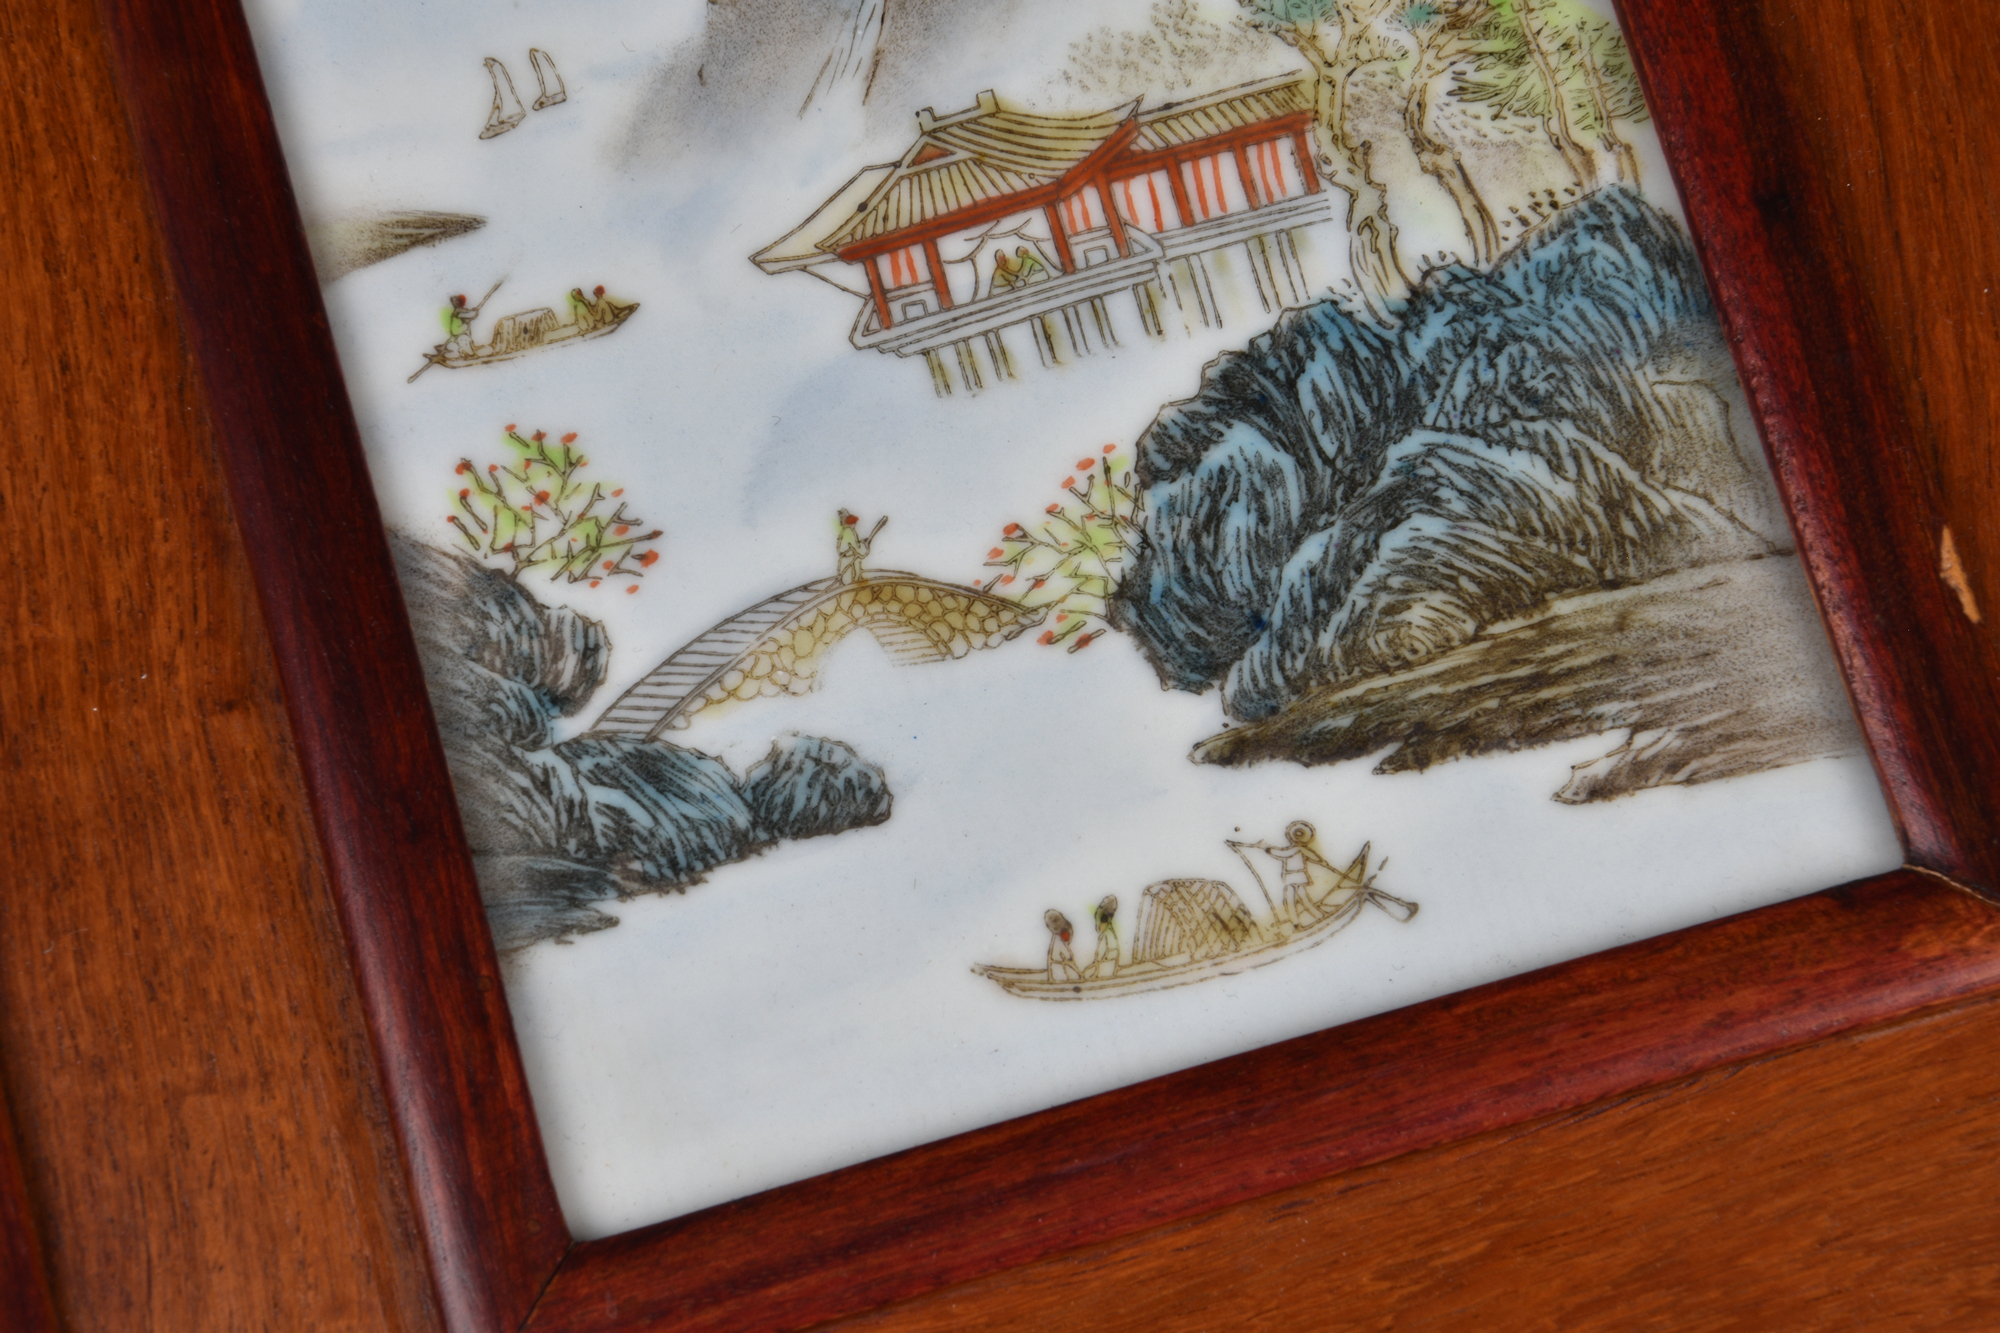 Two Chinese porcelain plaques, depicting boats in lake landscapes, late 20th century, in wooden - Image 9 of 11